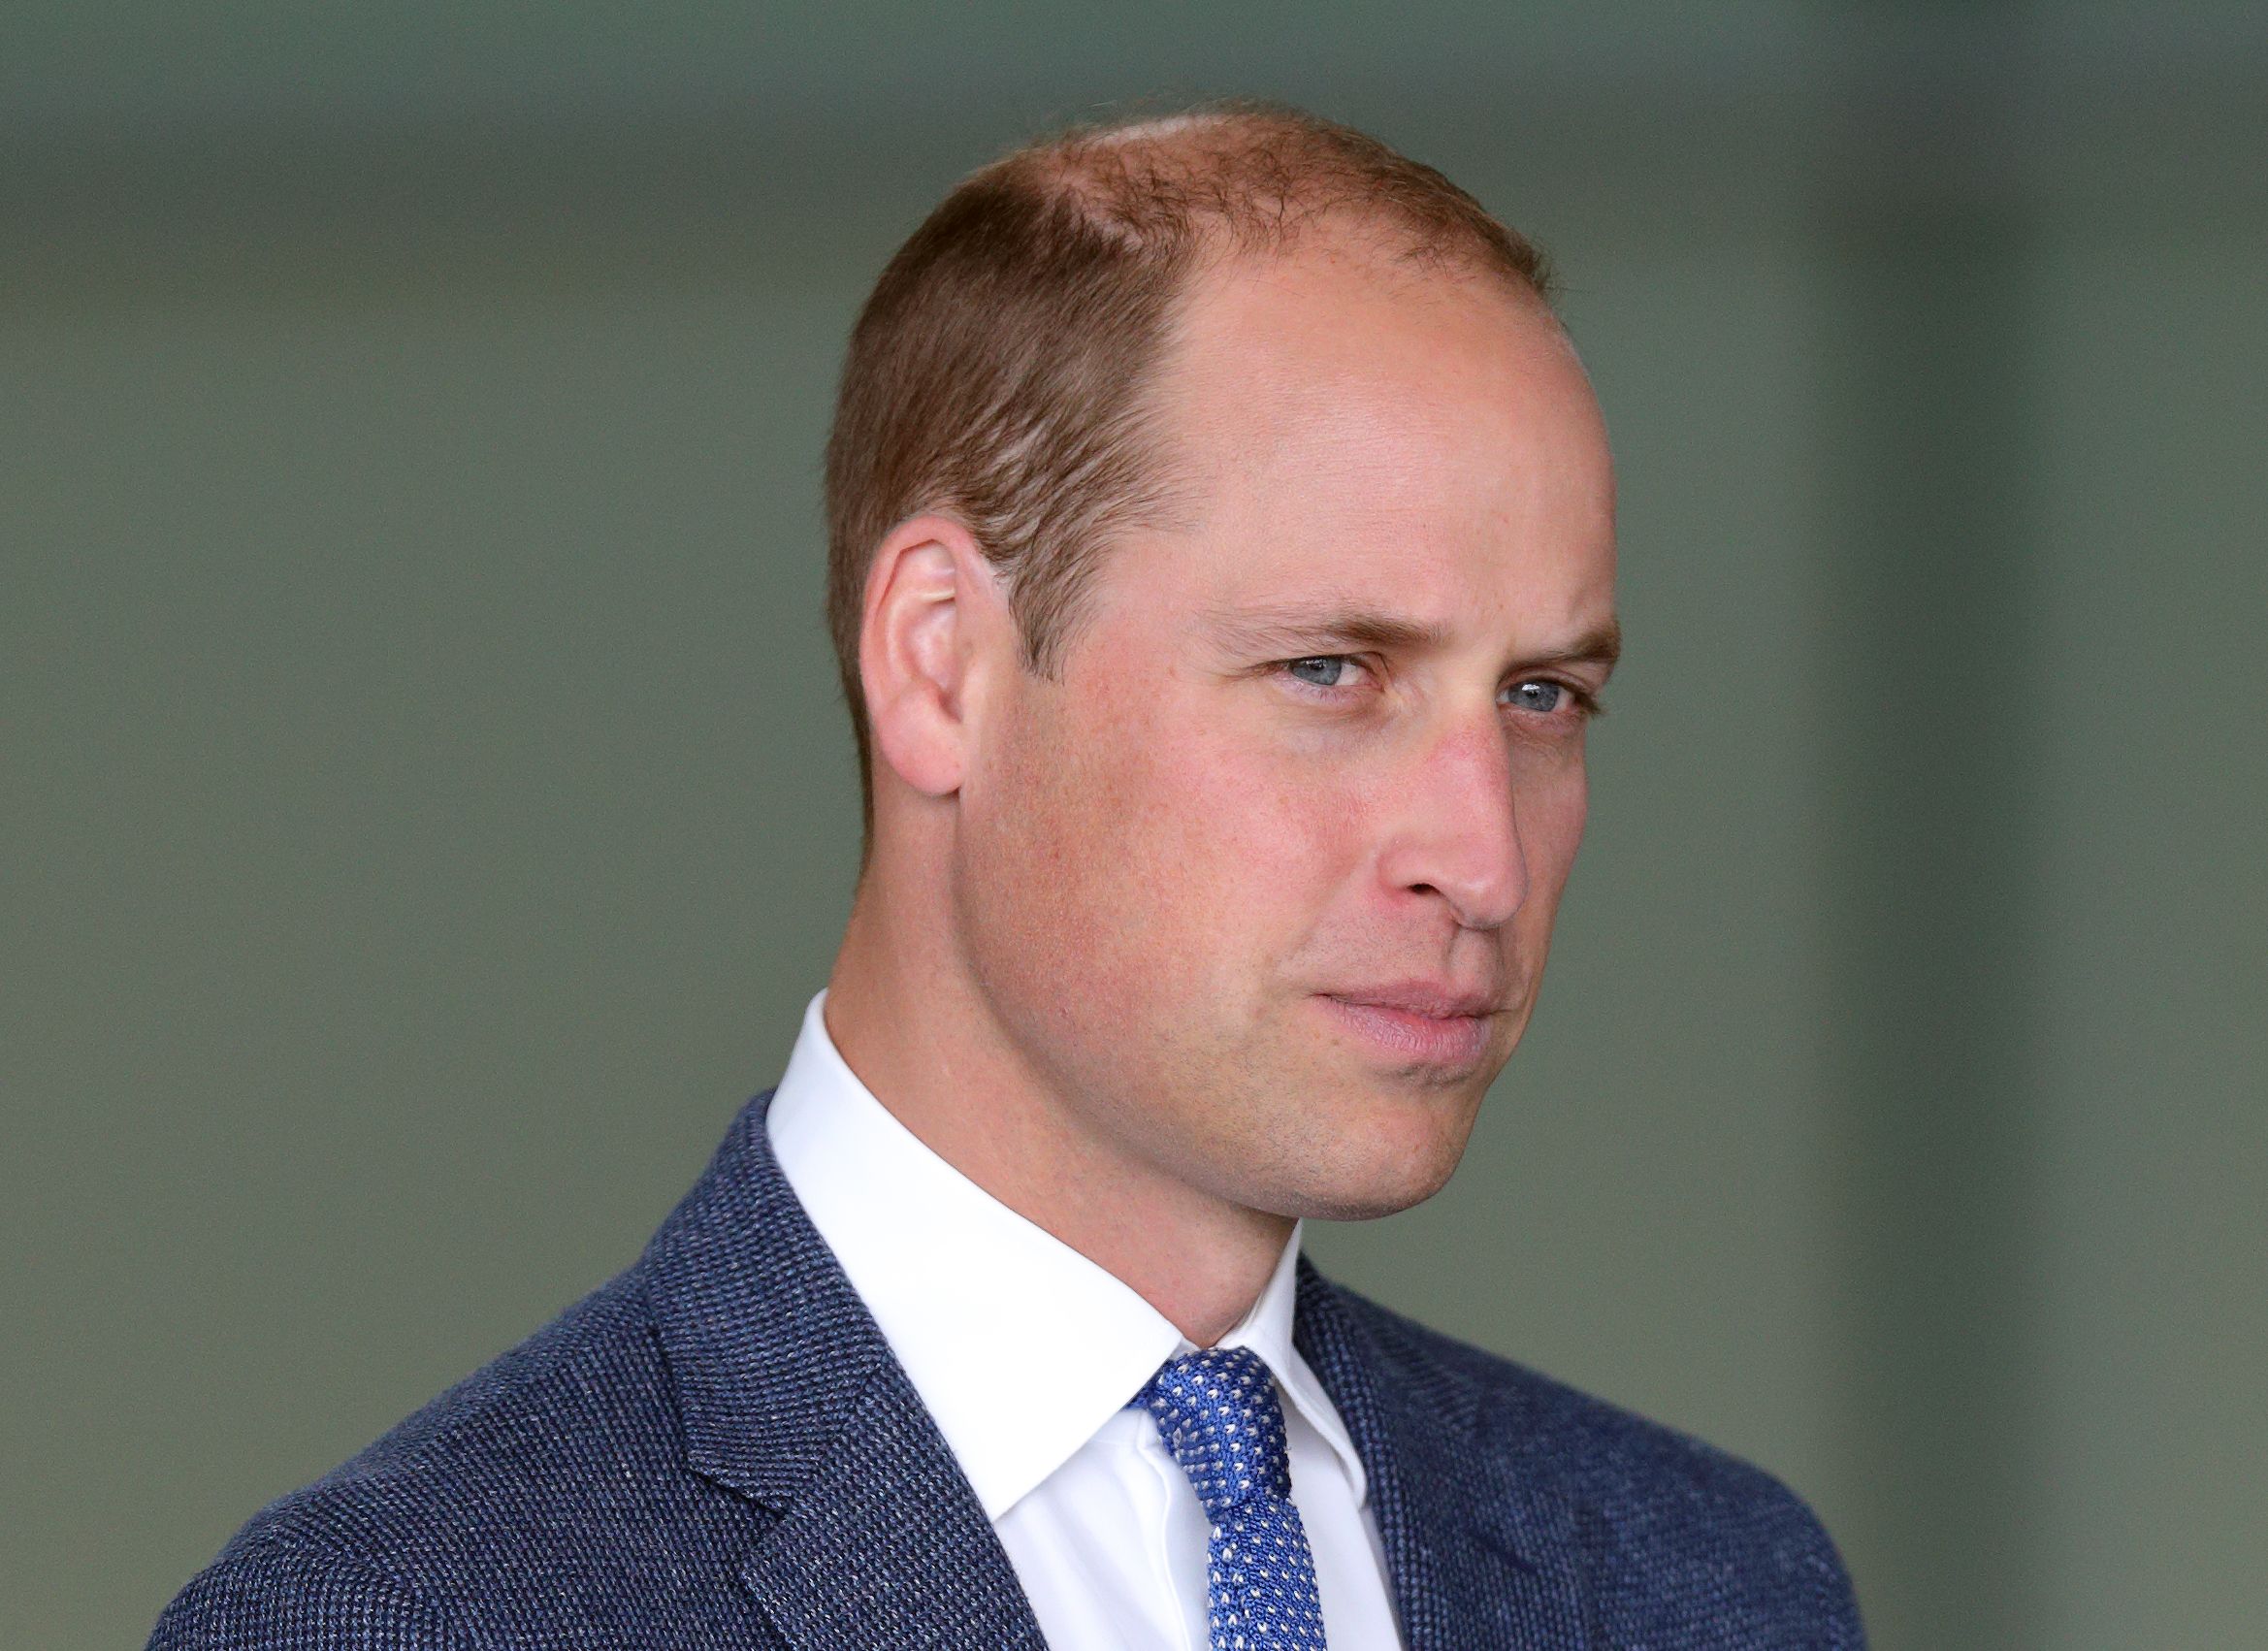 Leaked Video Shows Prince William Confronting Photographer Invading His Privacy on Family Bike Ride